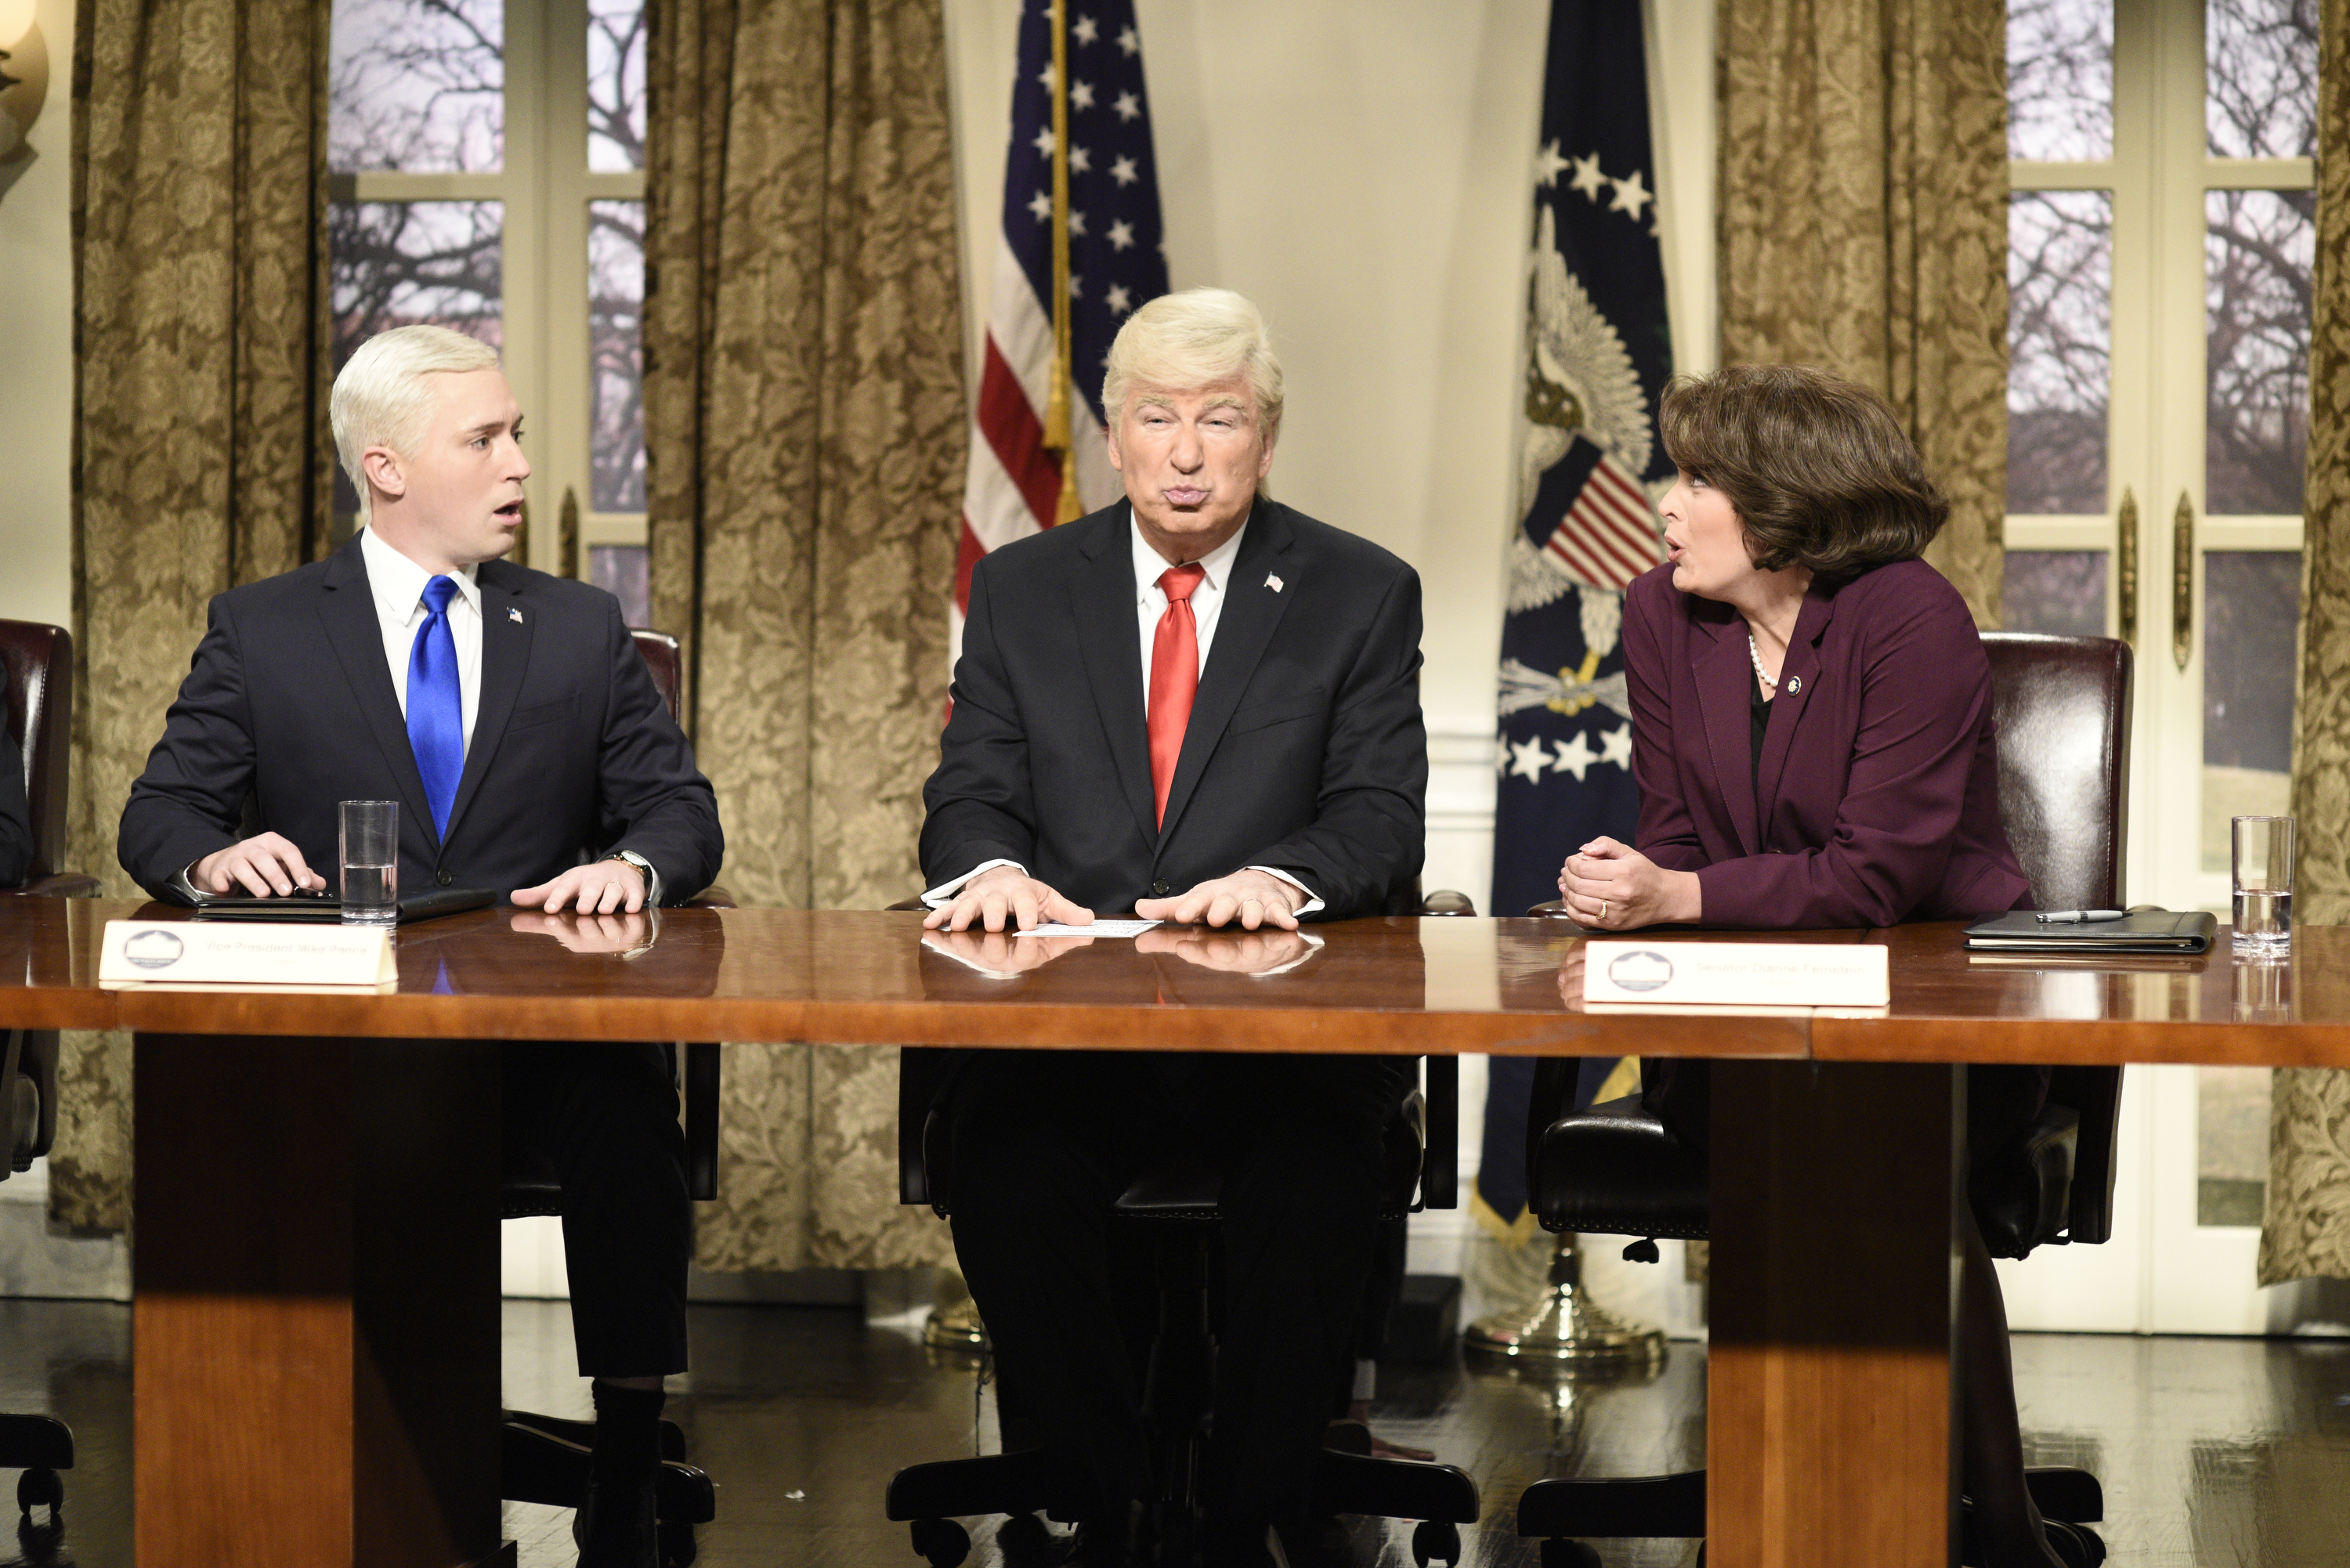 Beck Bennett as Vice President Mike Pence, Alec Baldwin as President Donald J. Trump, Cecily Strong as Senator Dianne Feinstein during the "Presidential Address Cold Open" in Studio 8H on Saturday, March 3, 2018 (Will Heath -
                       NBC/NBCU Photo Bank via Getty Images)